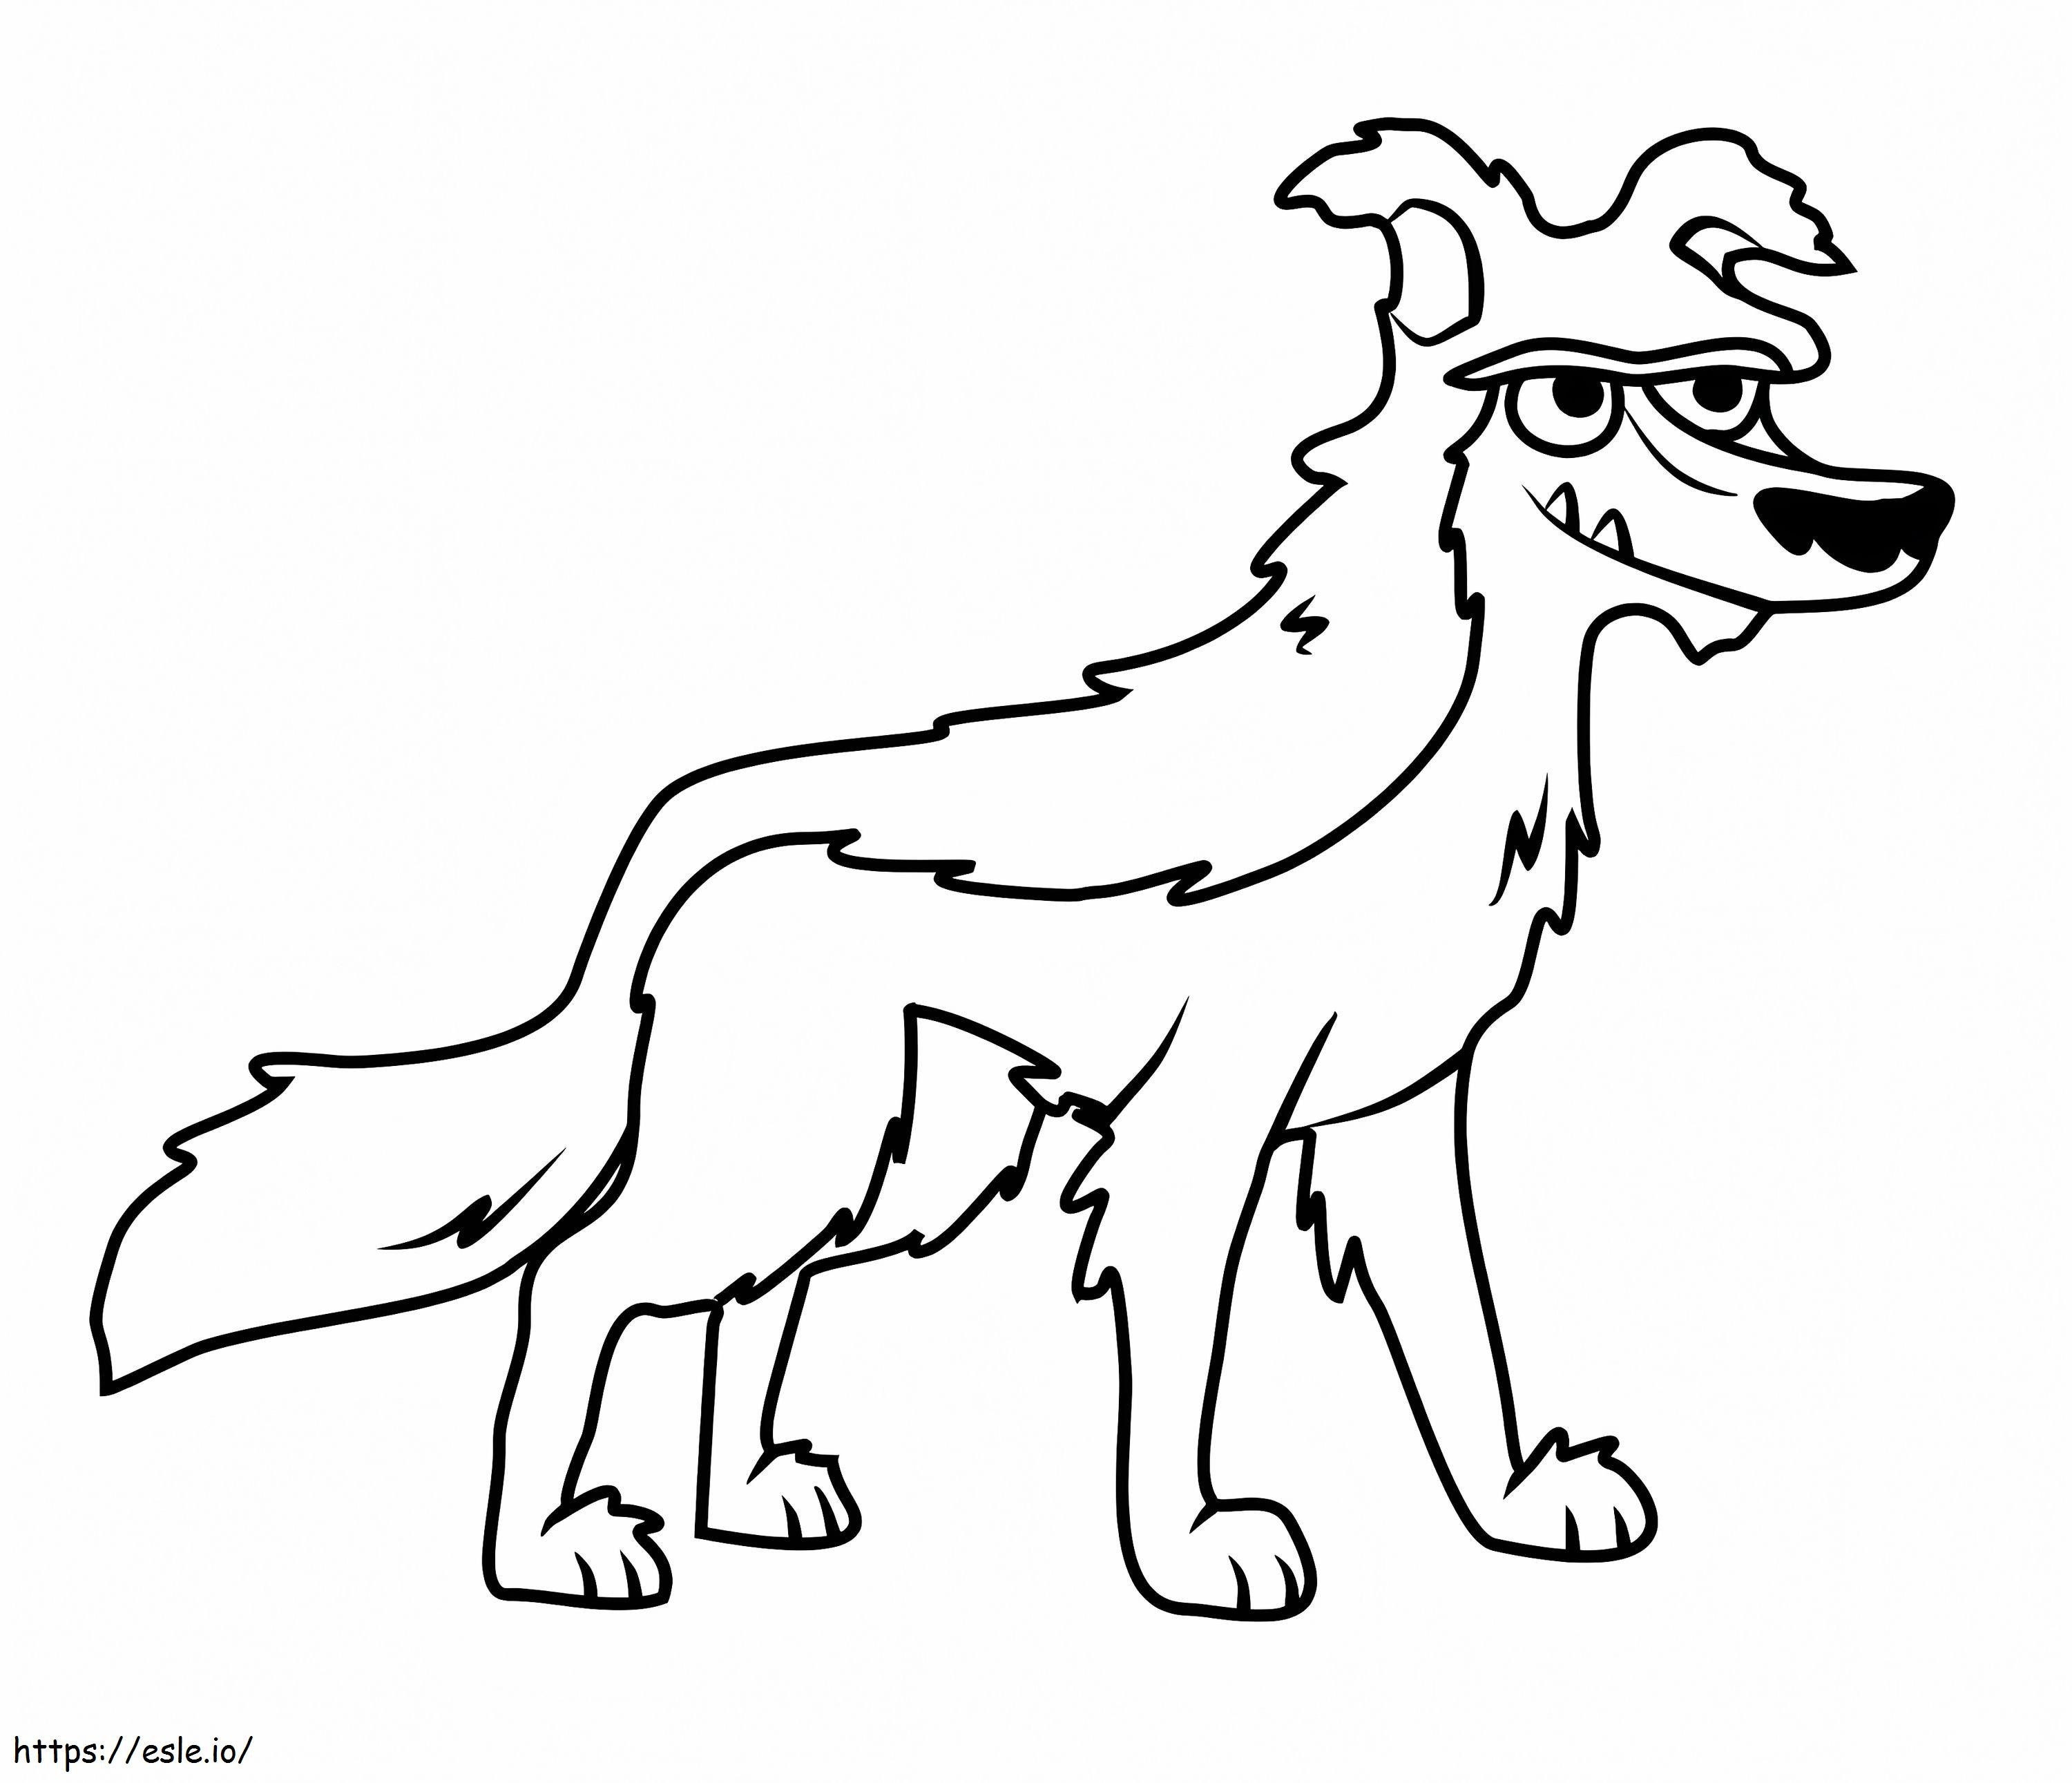 Woof Bark Tooth From Pound Puppies coloring page